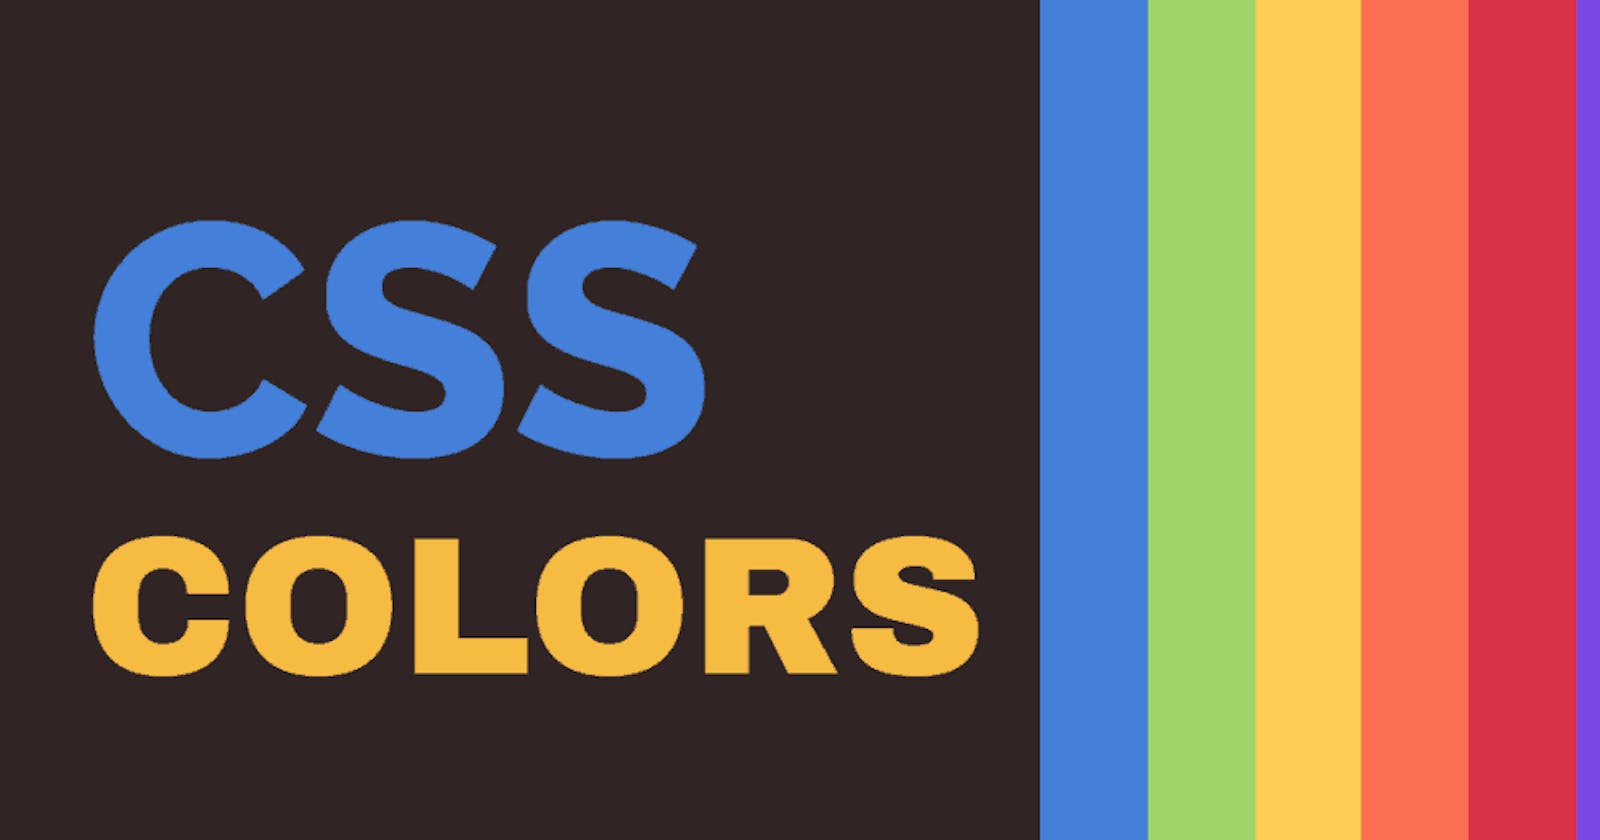 All the ways to color your text in CSS